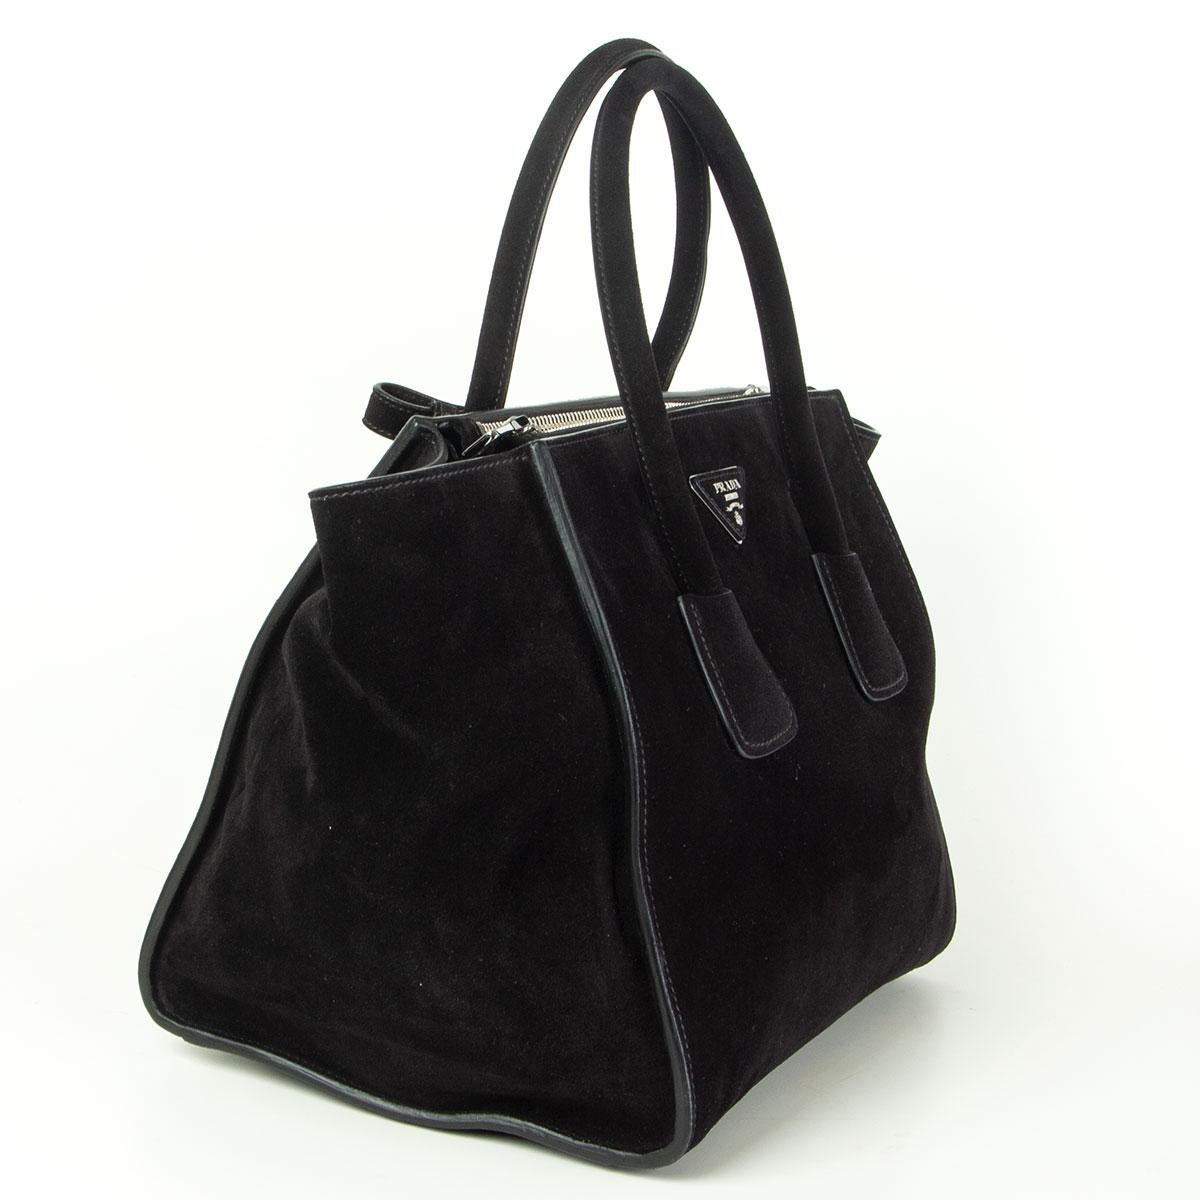 Prada 'Twin Pocket' tote in black Scamosciato (suede) featuring silver-tone hardware. Opens with a push-button and is lined in smooth black lambskin with two extra large zip pockets on the side, a small zip pocket against the back and a open pocket